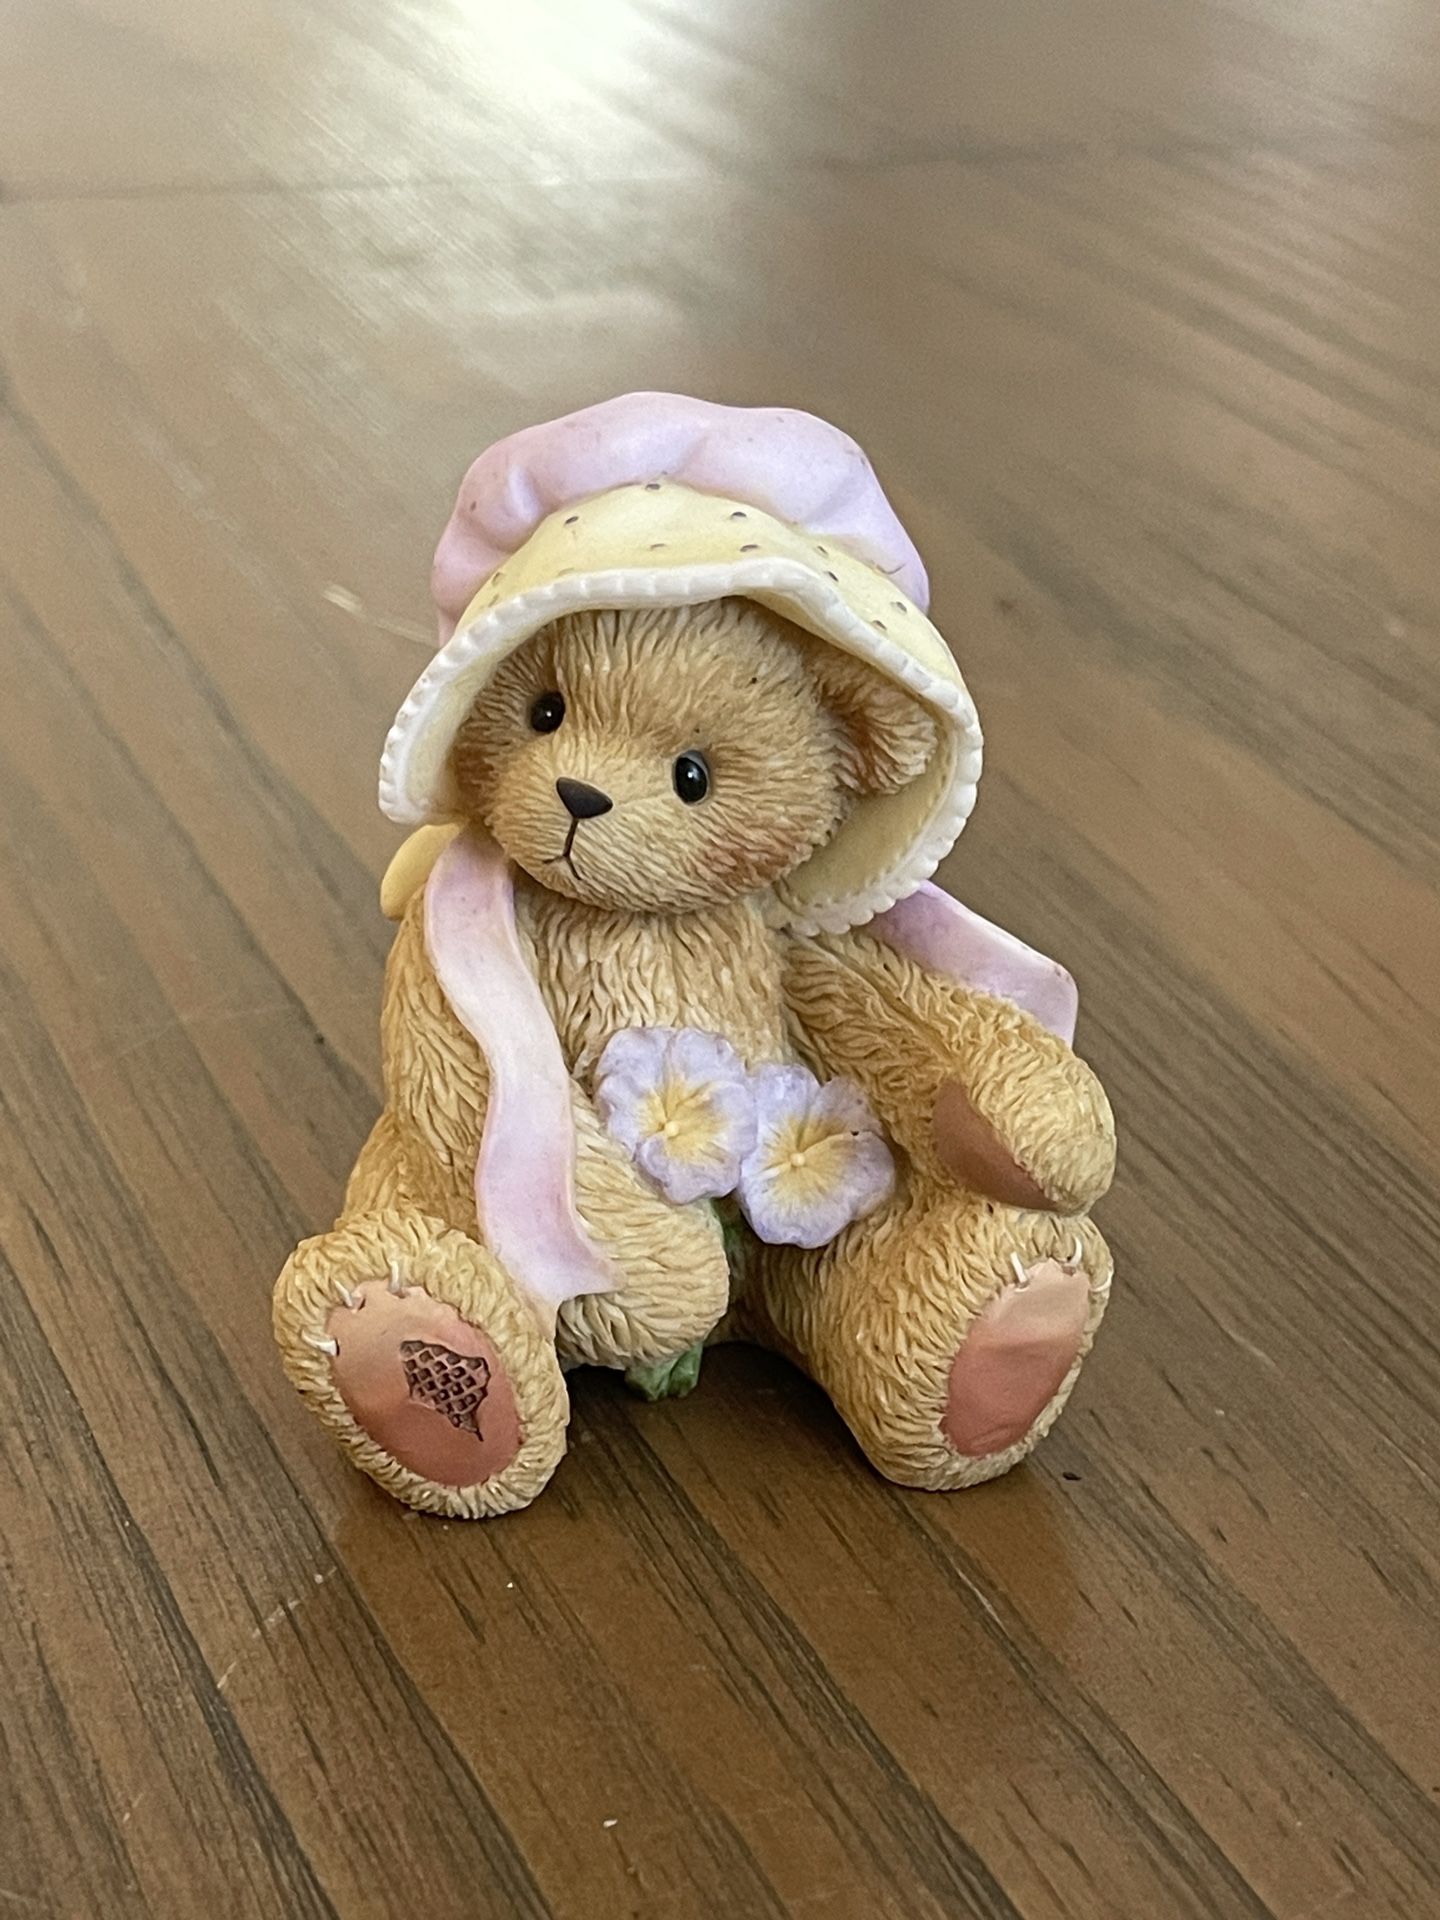 Cherished Teddies “A Blossoming Friendship Always Makes A Heart Smile”